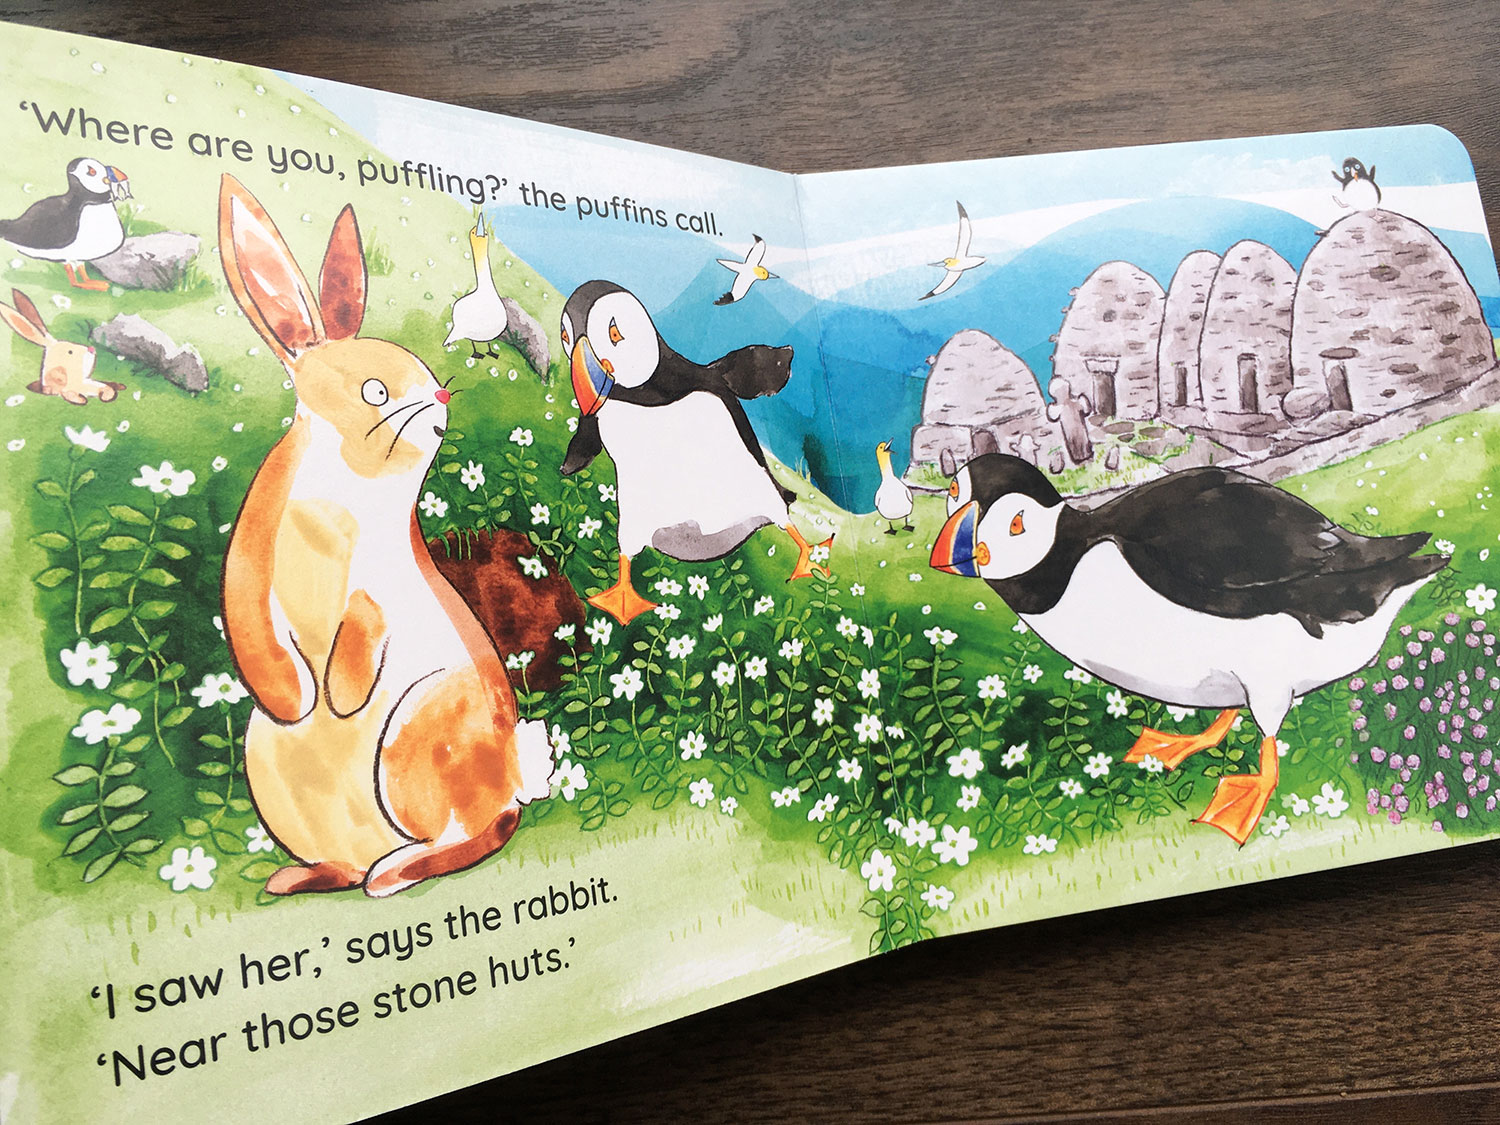 Where Are You Puffling? board book the puffins ask a rabbit